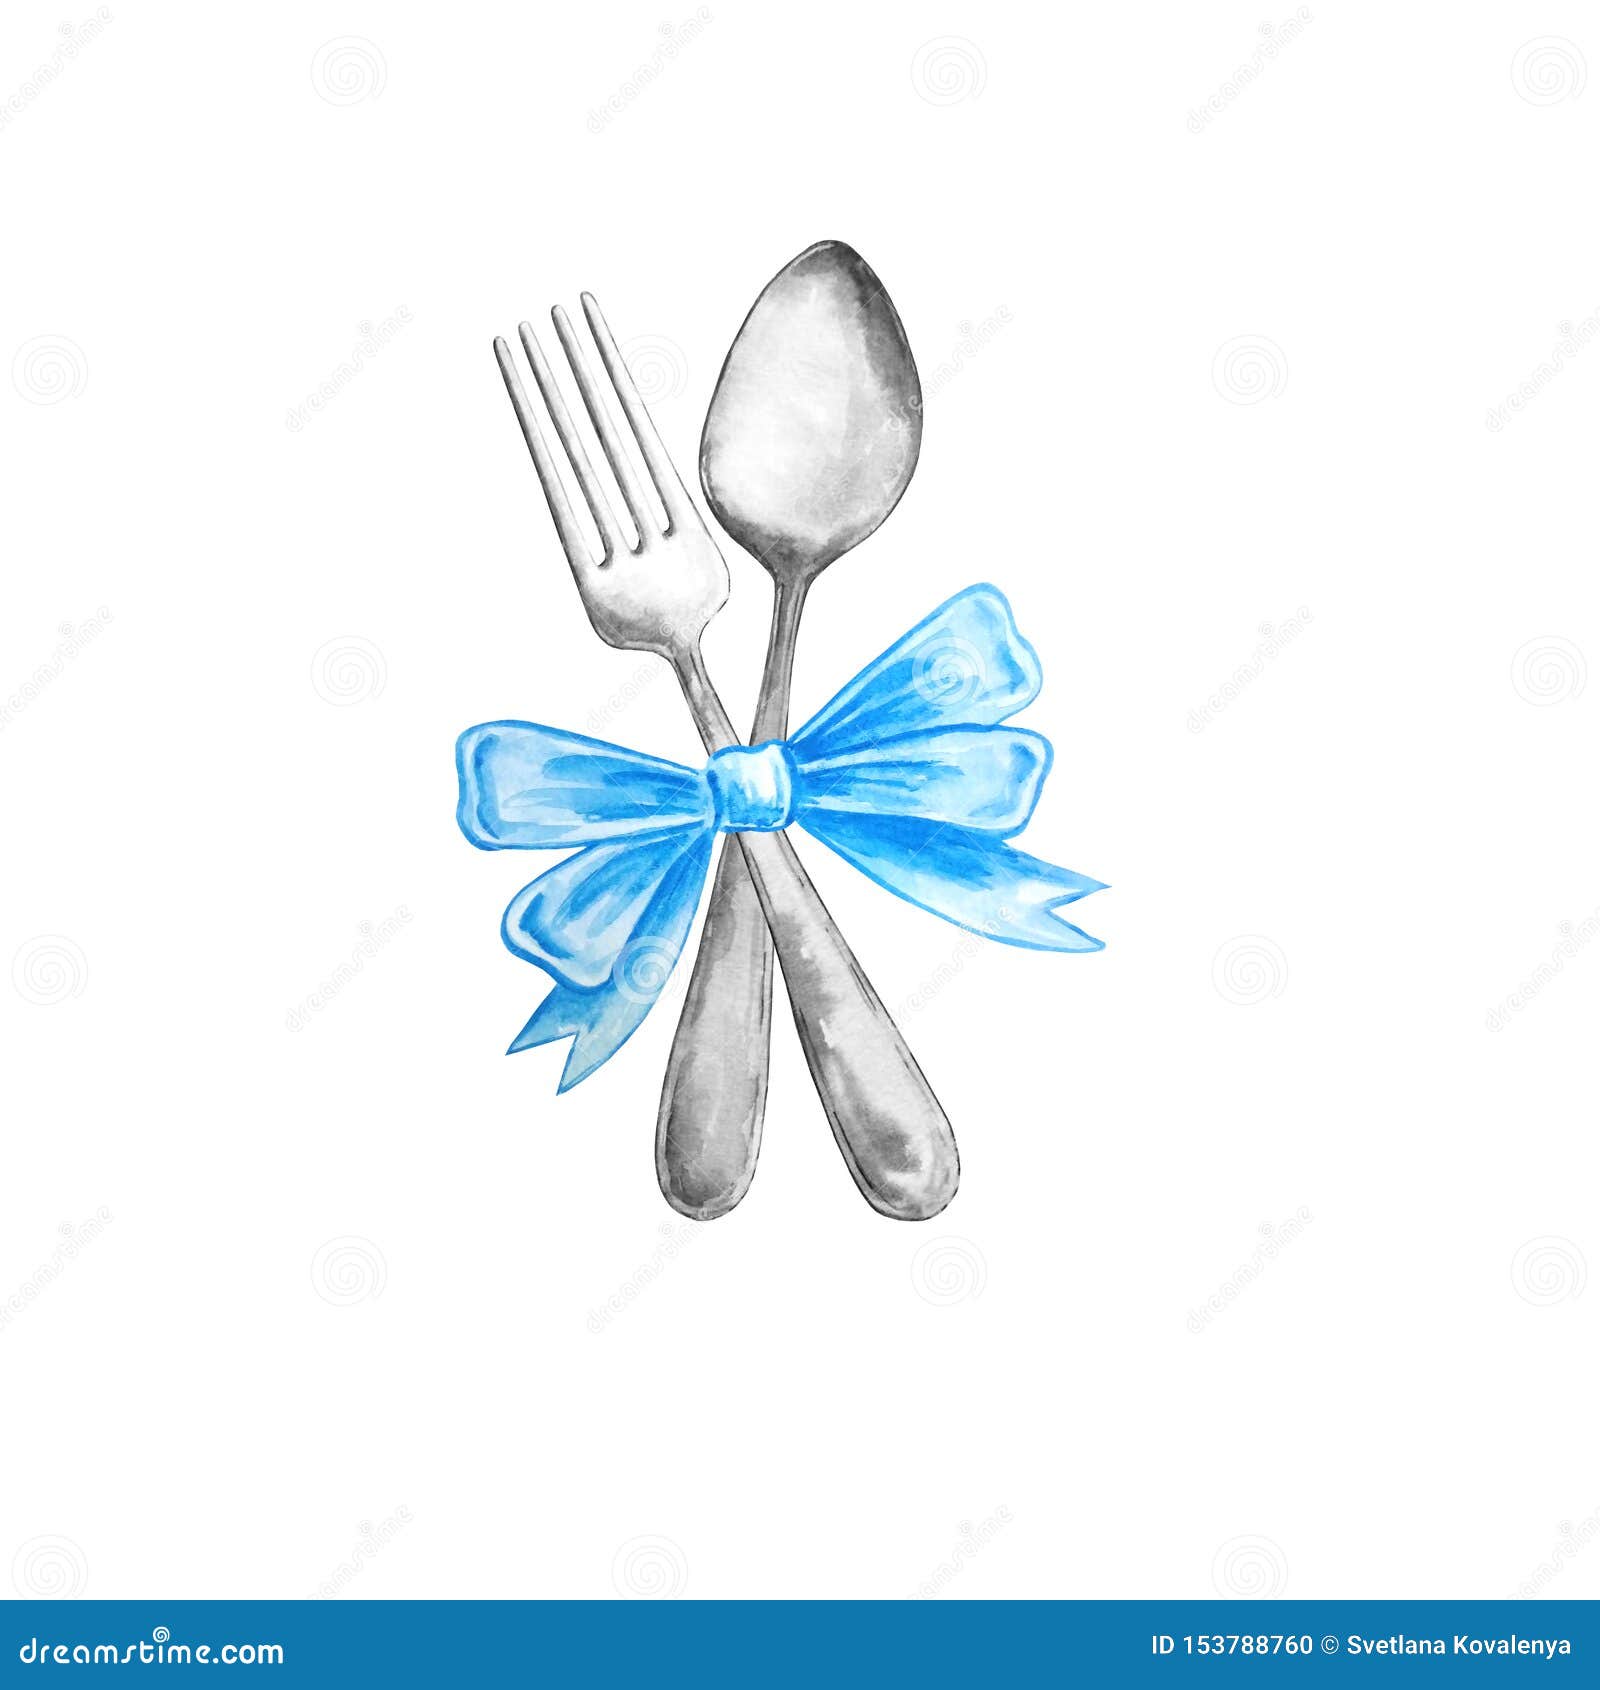 watercolor cutlery, silver, spoon and fork with bow